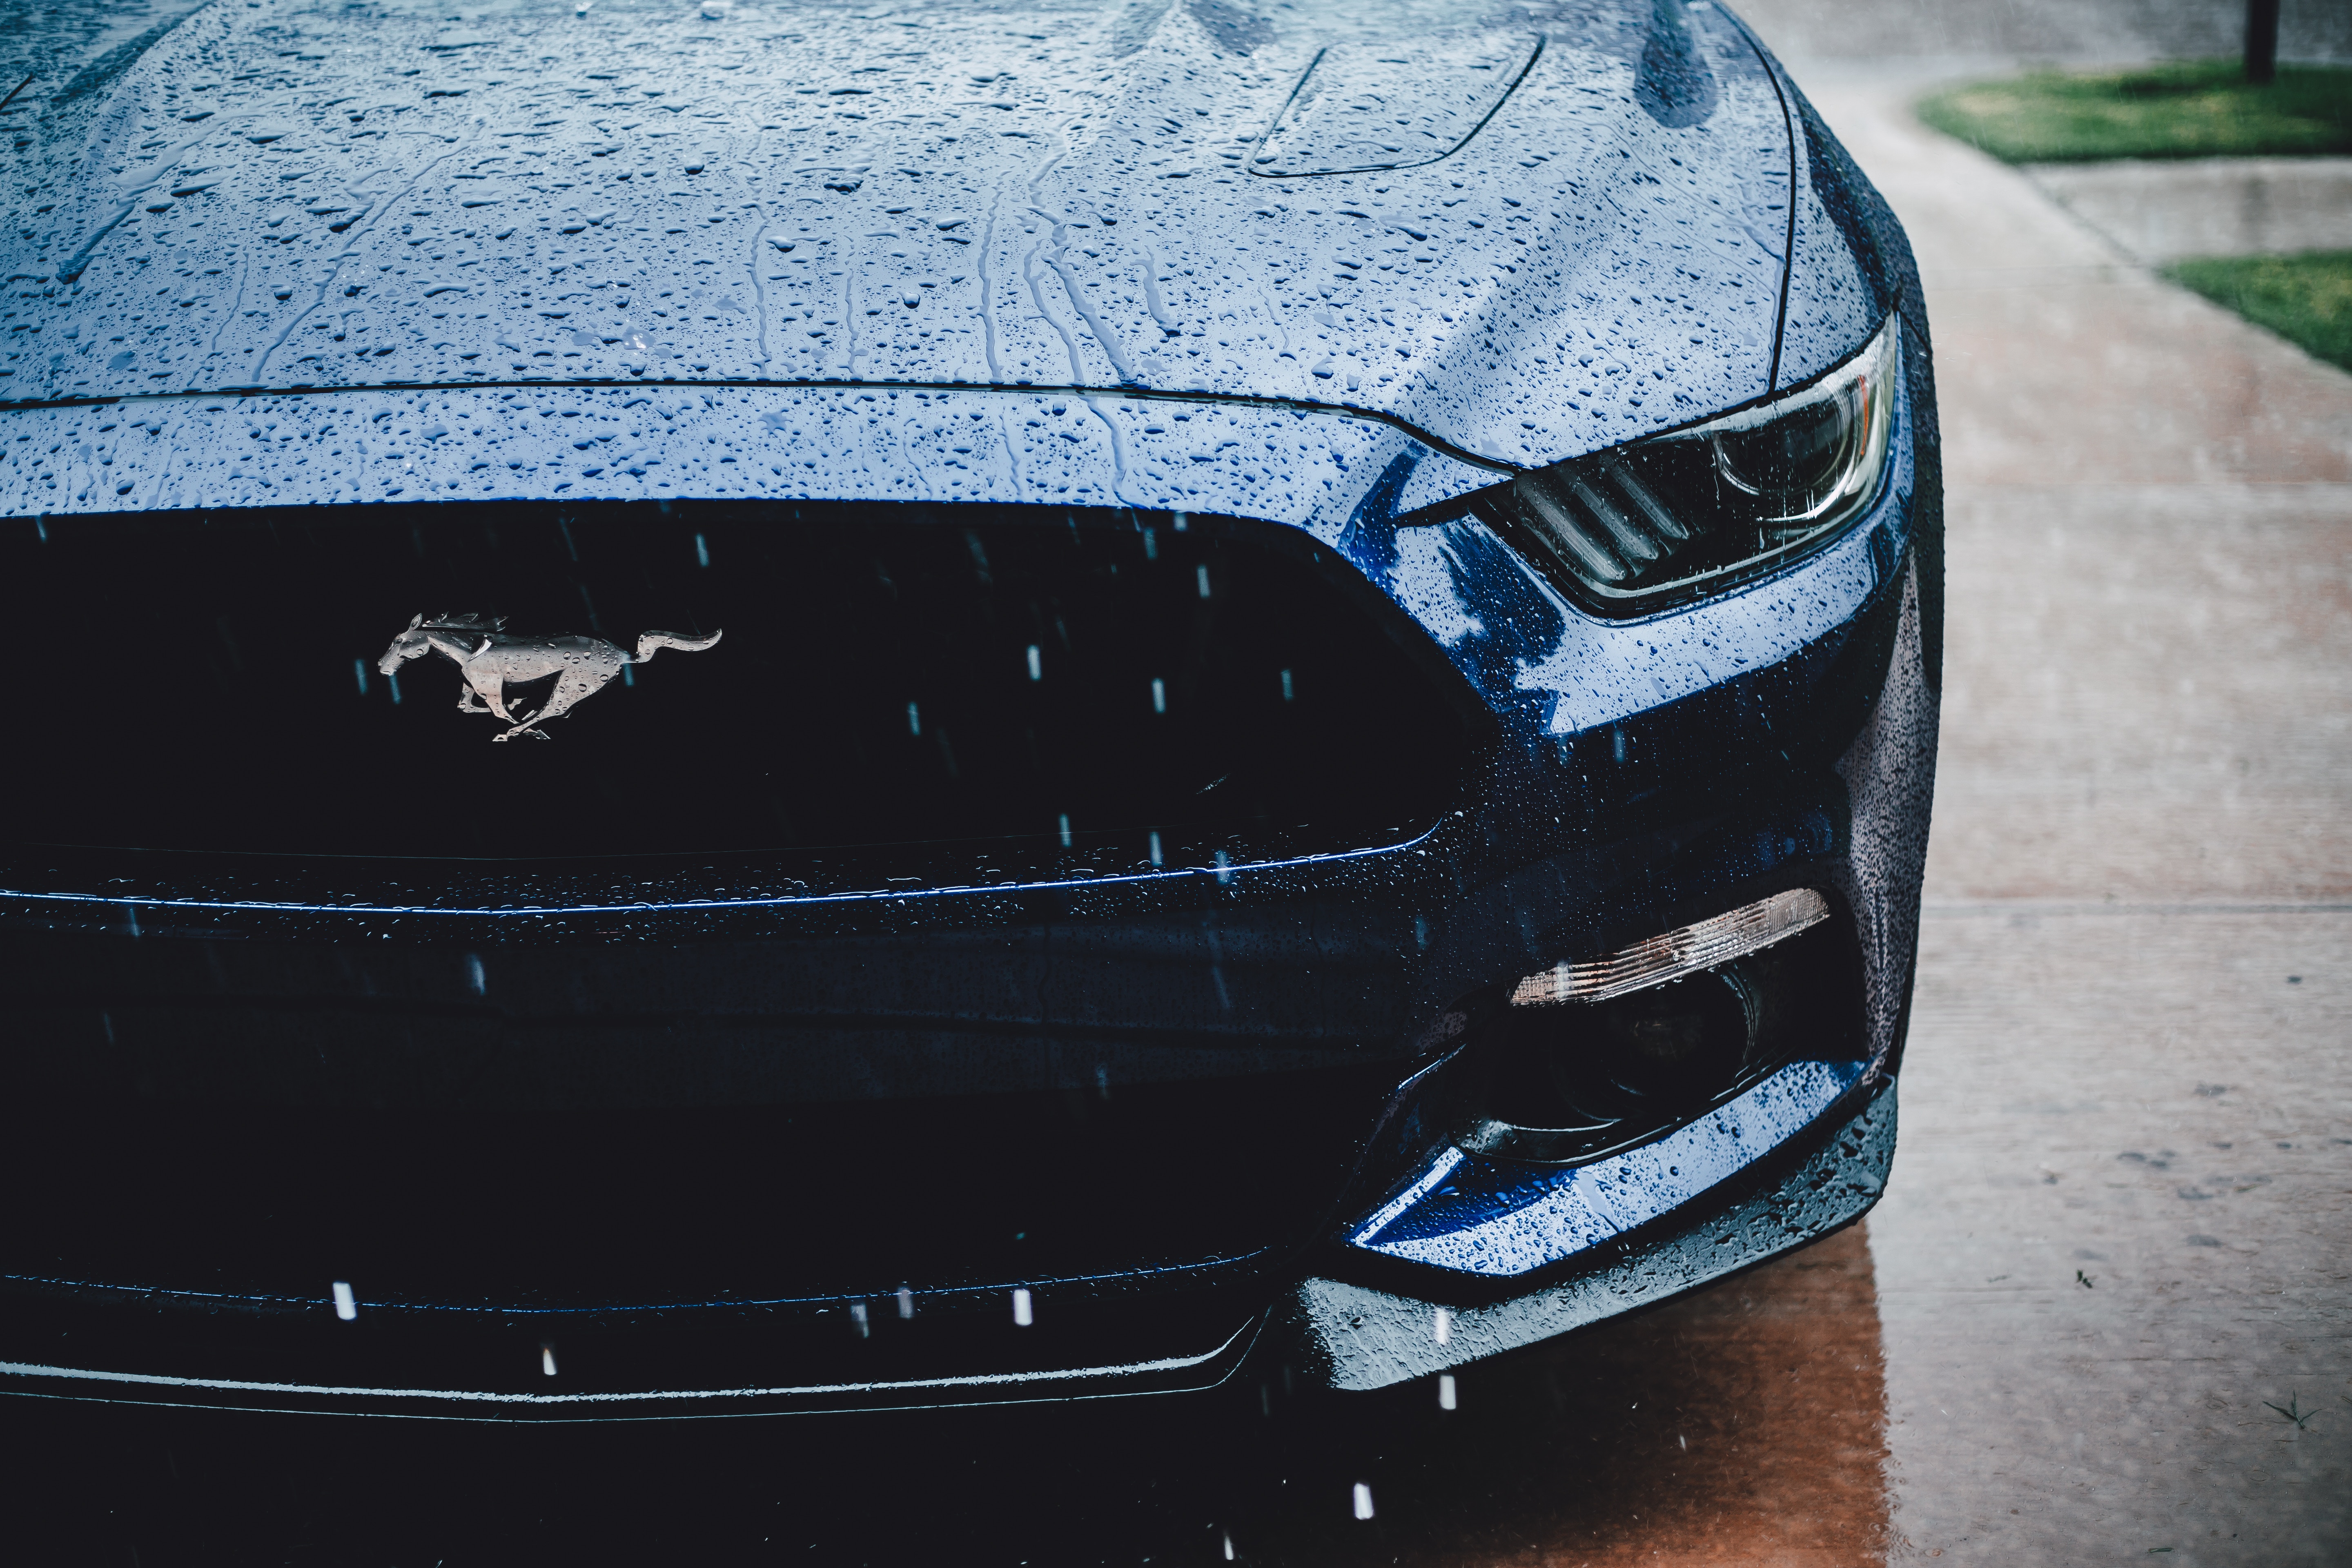 ford mustang, cars, rain, front view, headlight 1080p